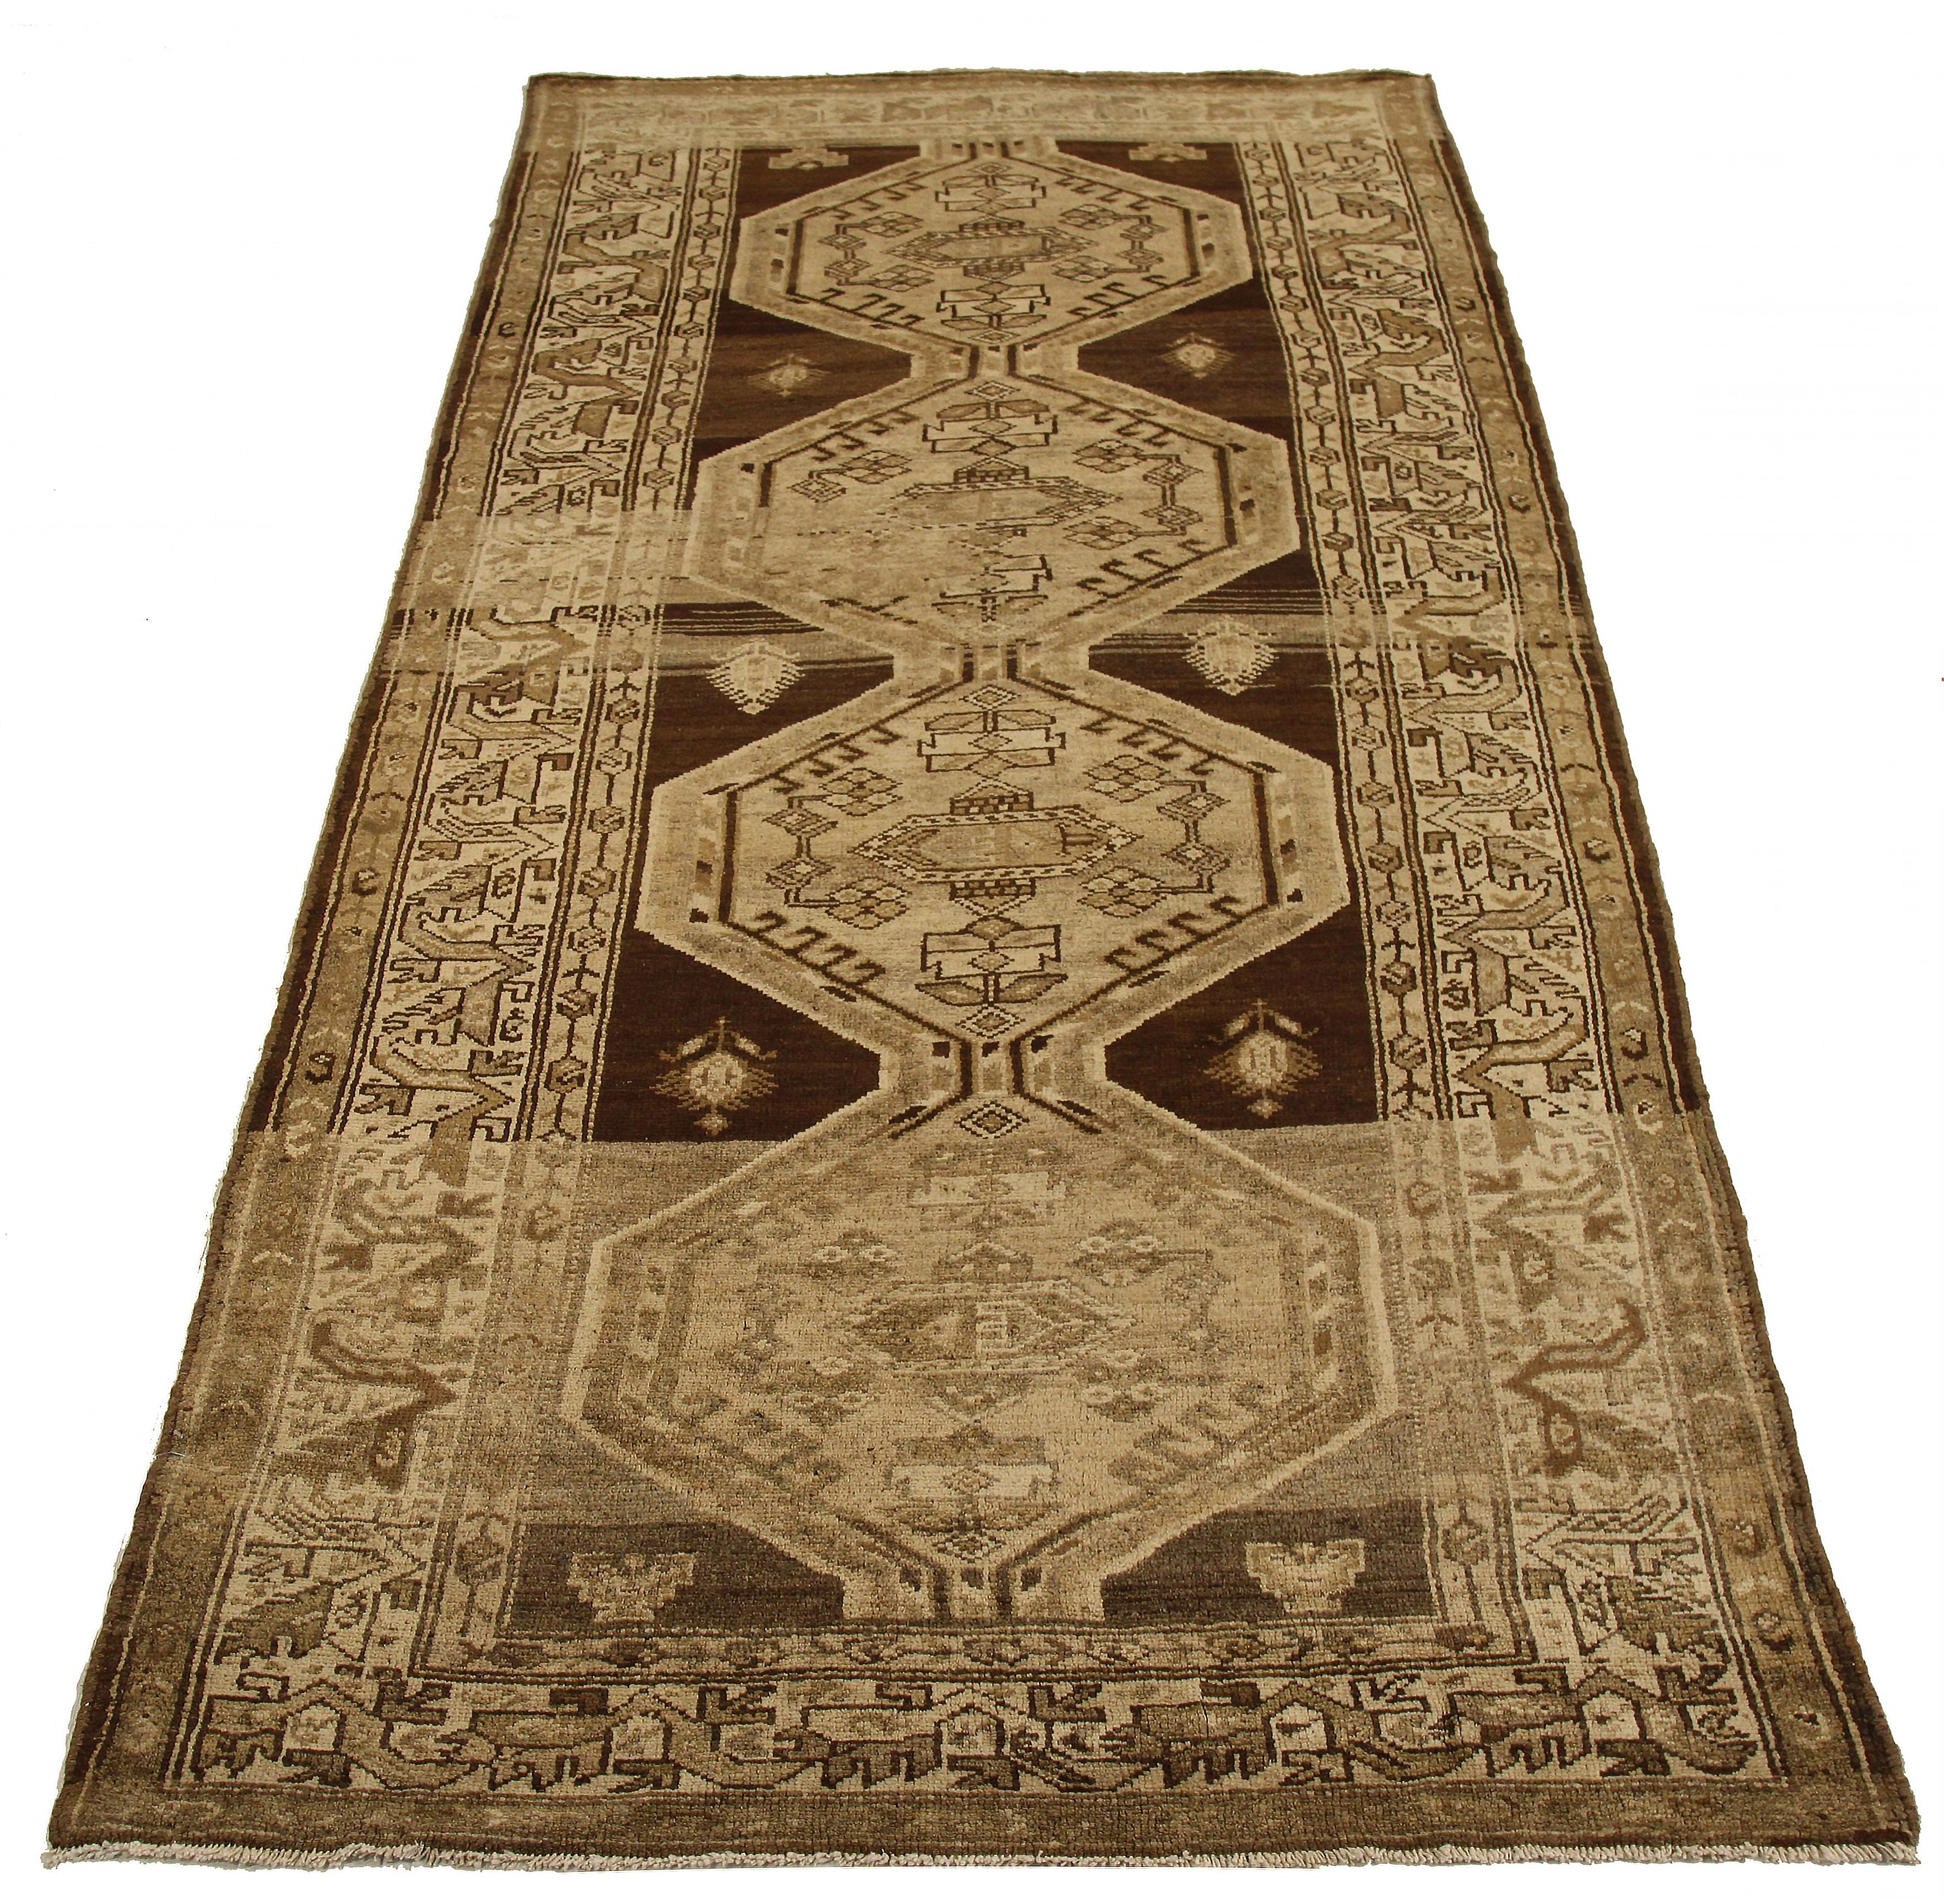 Antique Persian area rug handwoven from the finest sheep’s wool. It’s colored with all-natural vegetable dyes that are safe for humans and pets. It’s a traditional Zanjan design featuring geometric-tribal details on a beige field. It’s a lovely